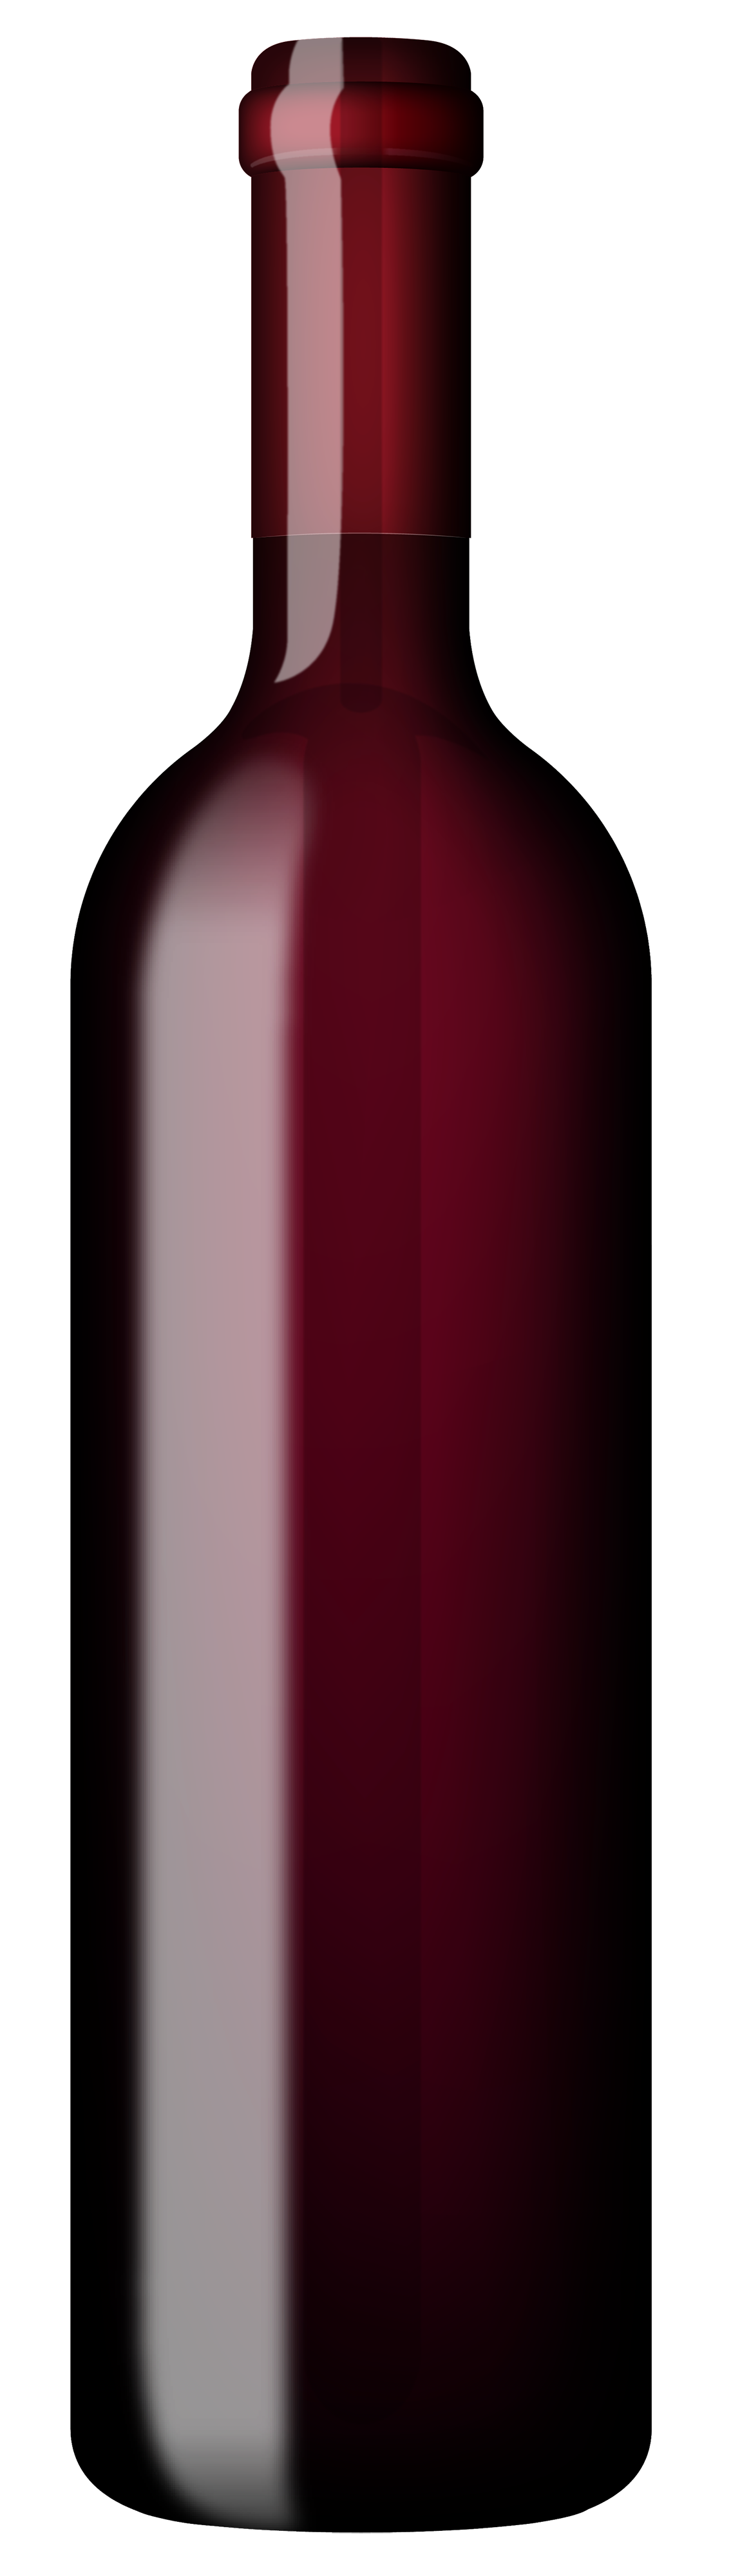 Wine bottle red bottle of wine clipart the clipart